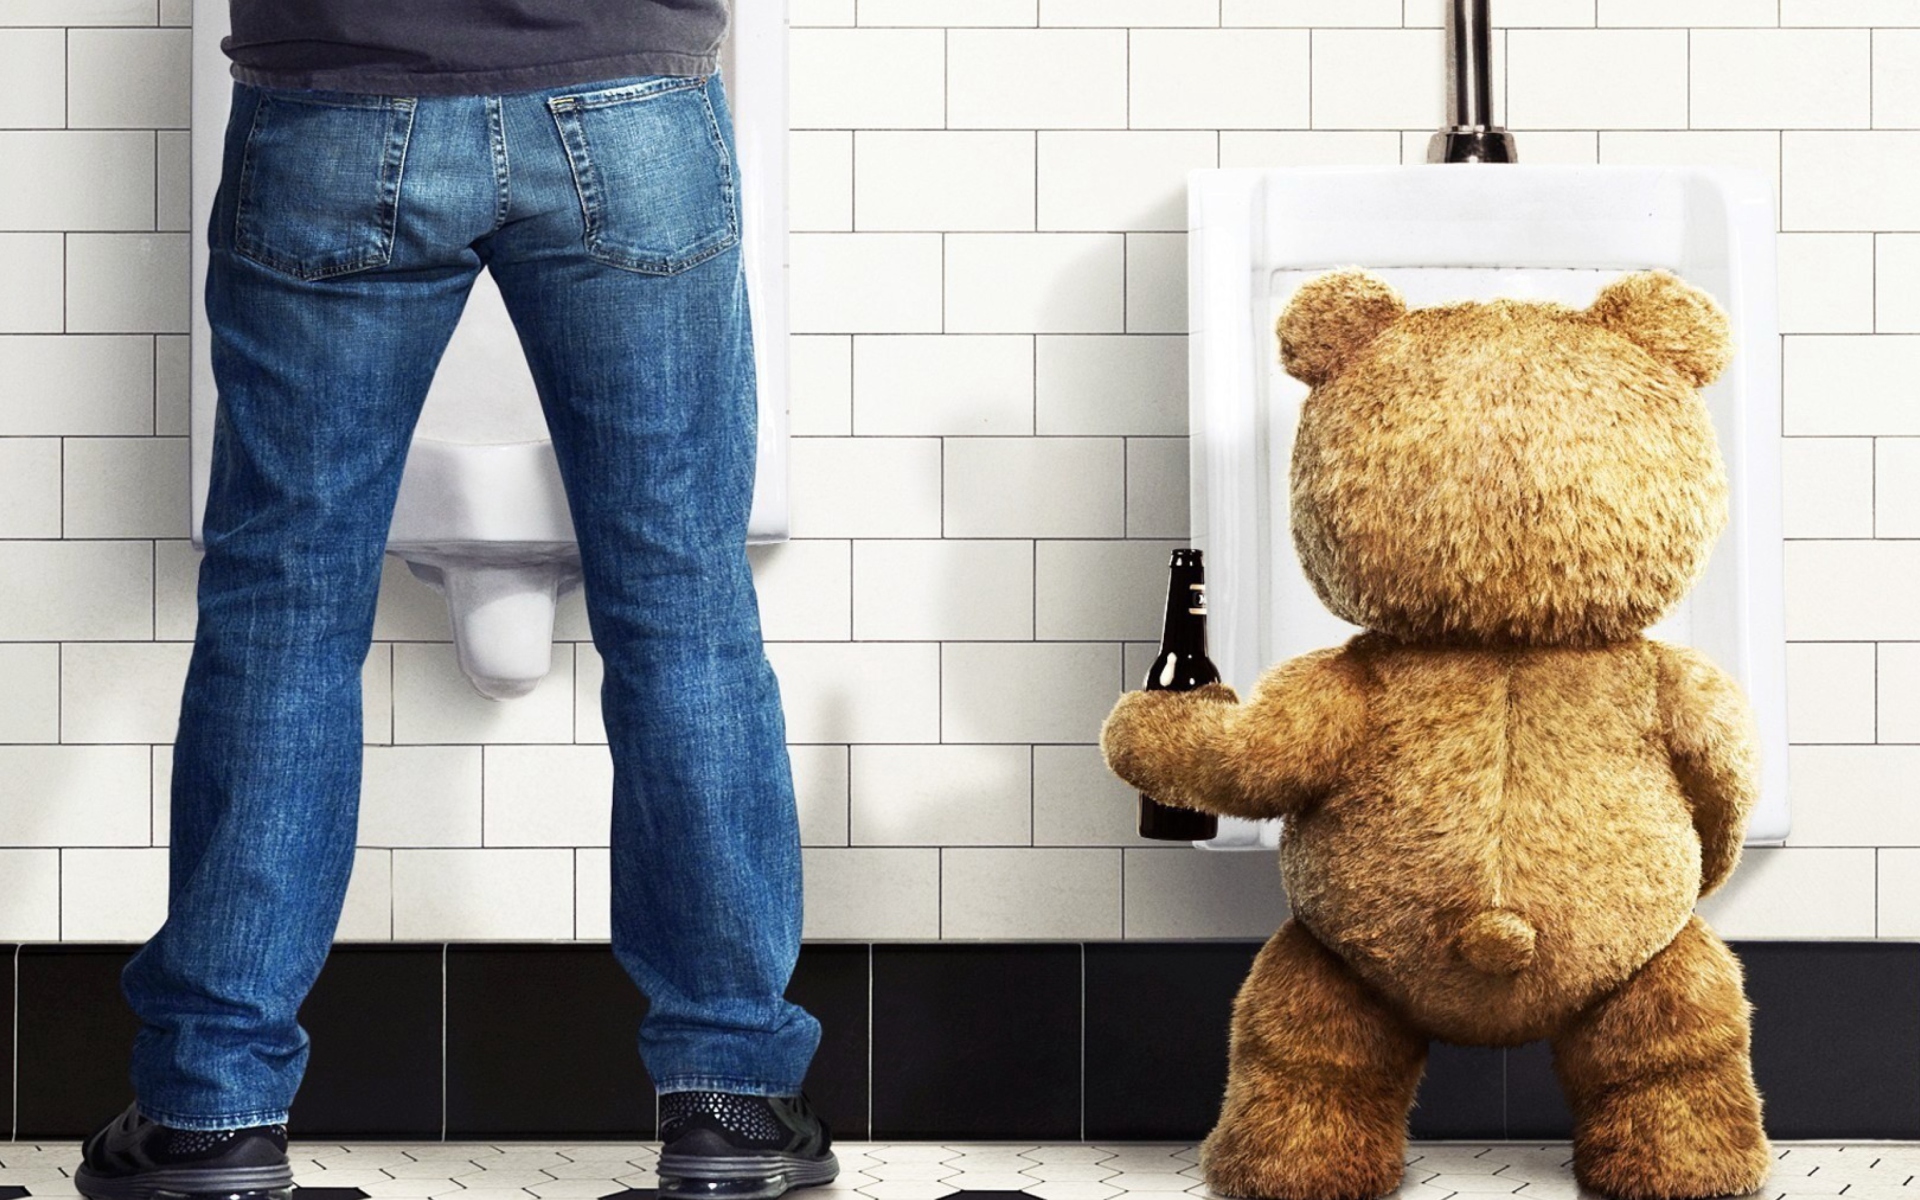 Ted Poster wallpaper 1920x1200